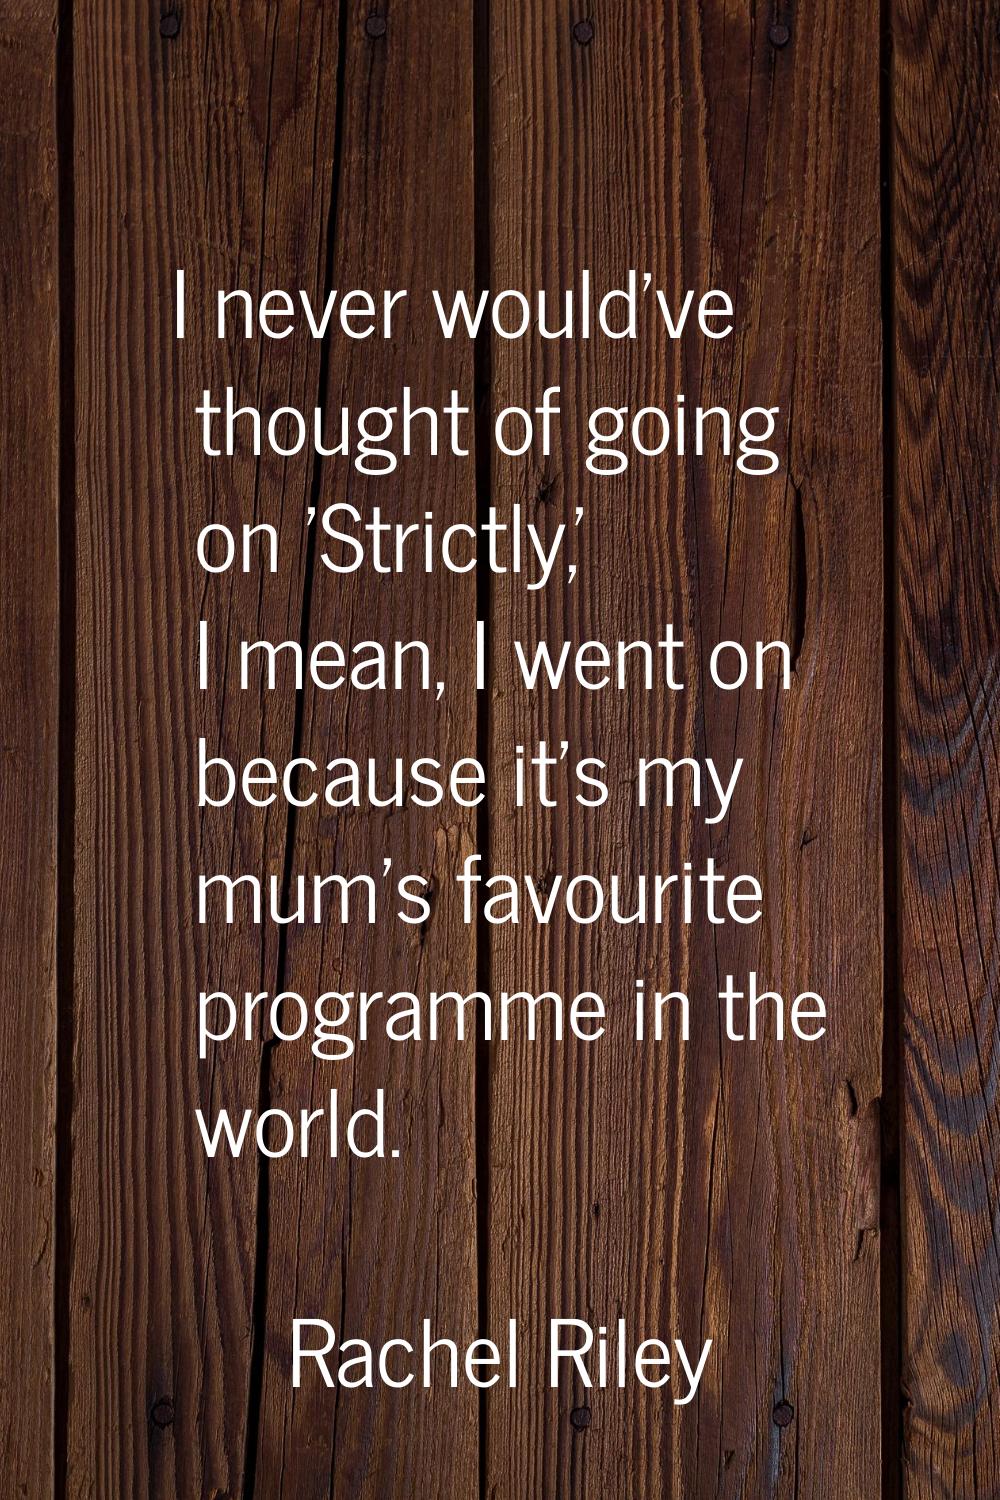 I never would've thought of going on 'Strictly,' I mean, I went on because it's my mum's favourite 